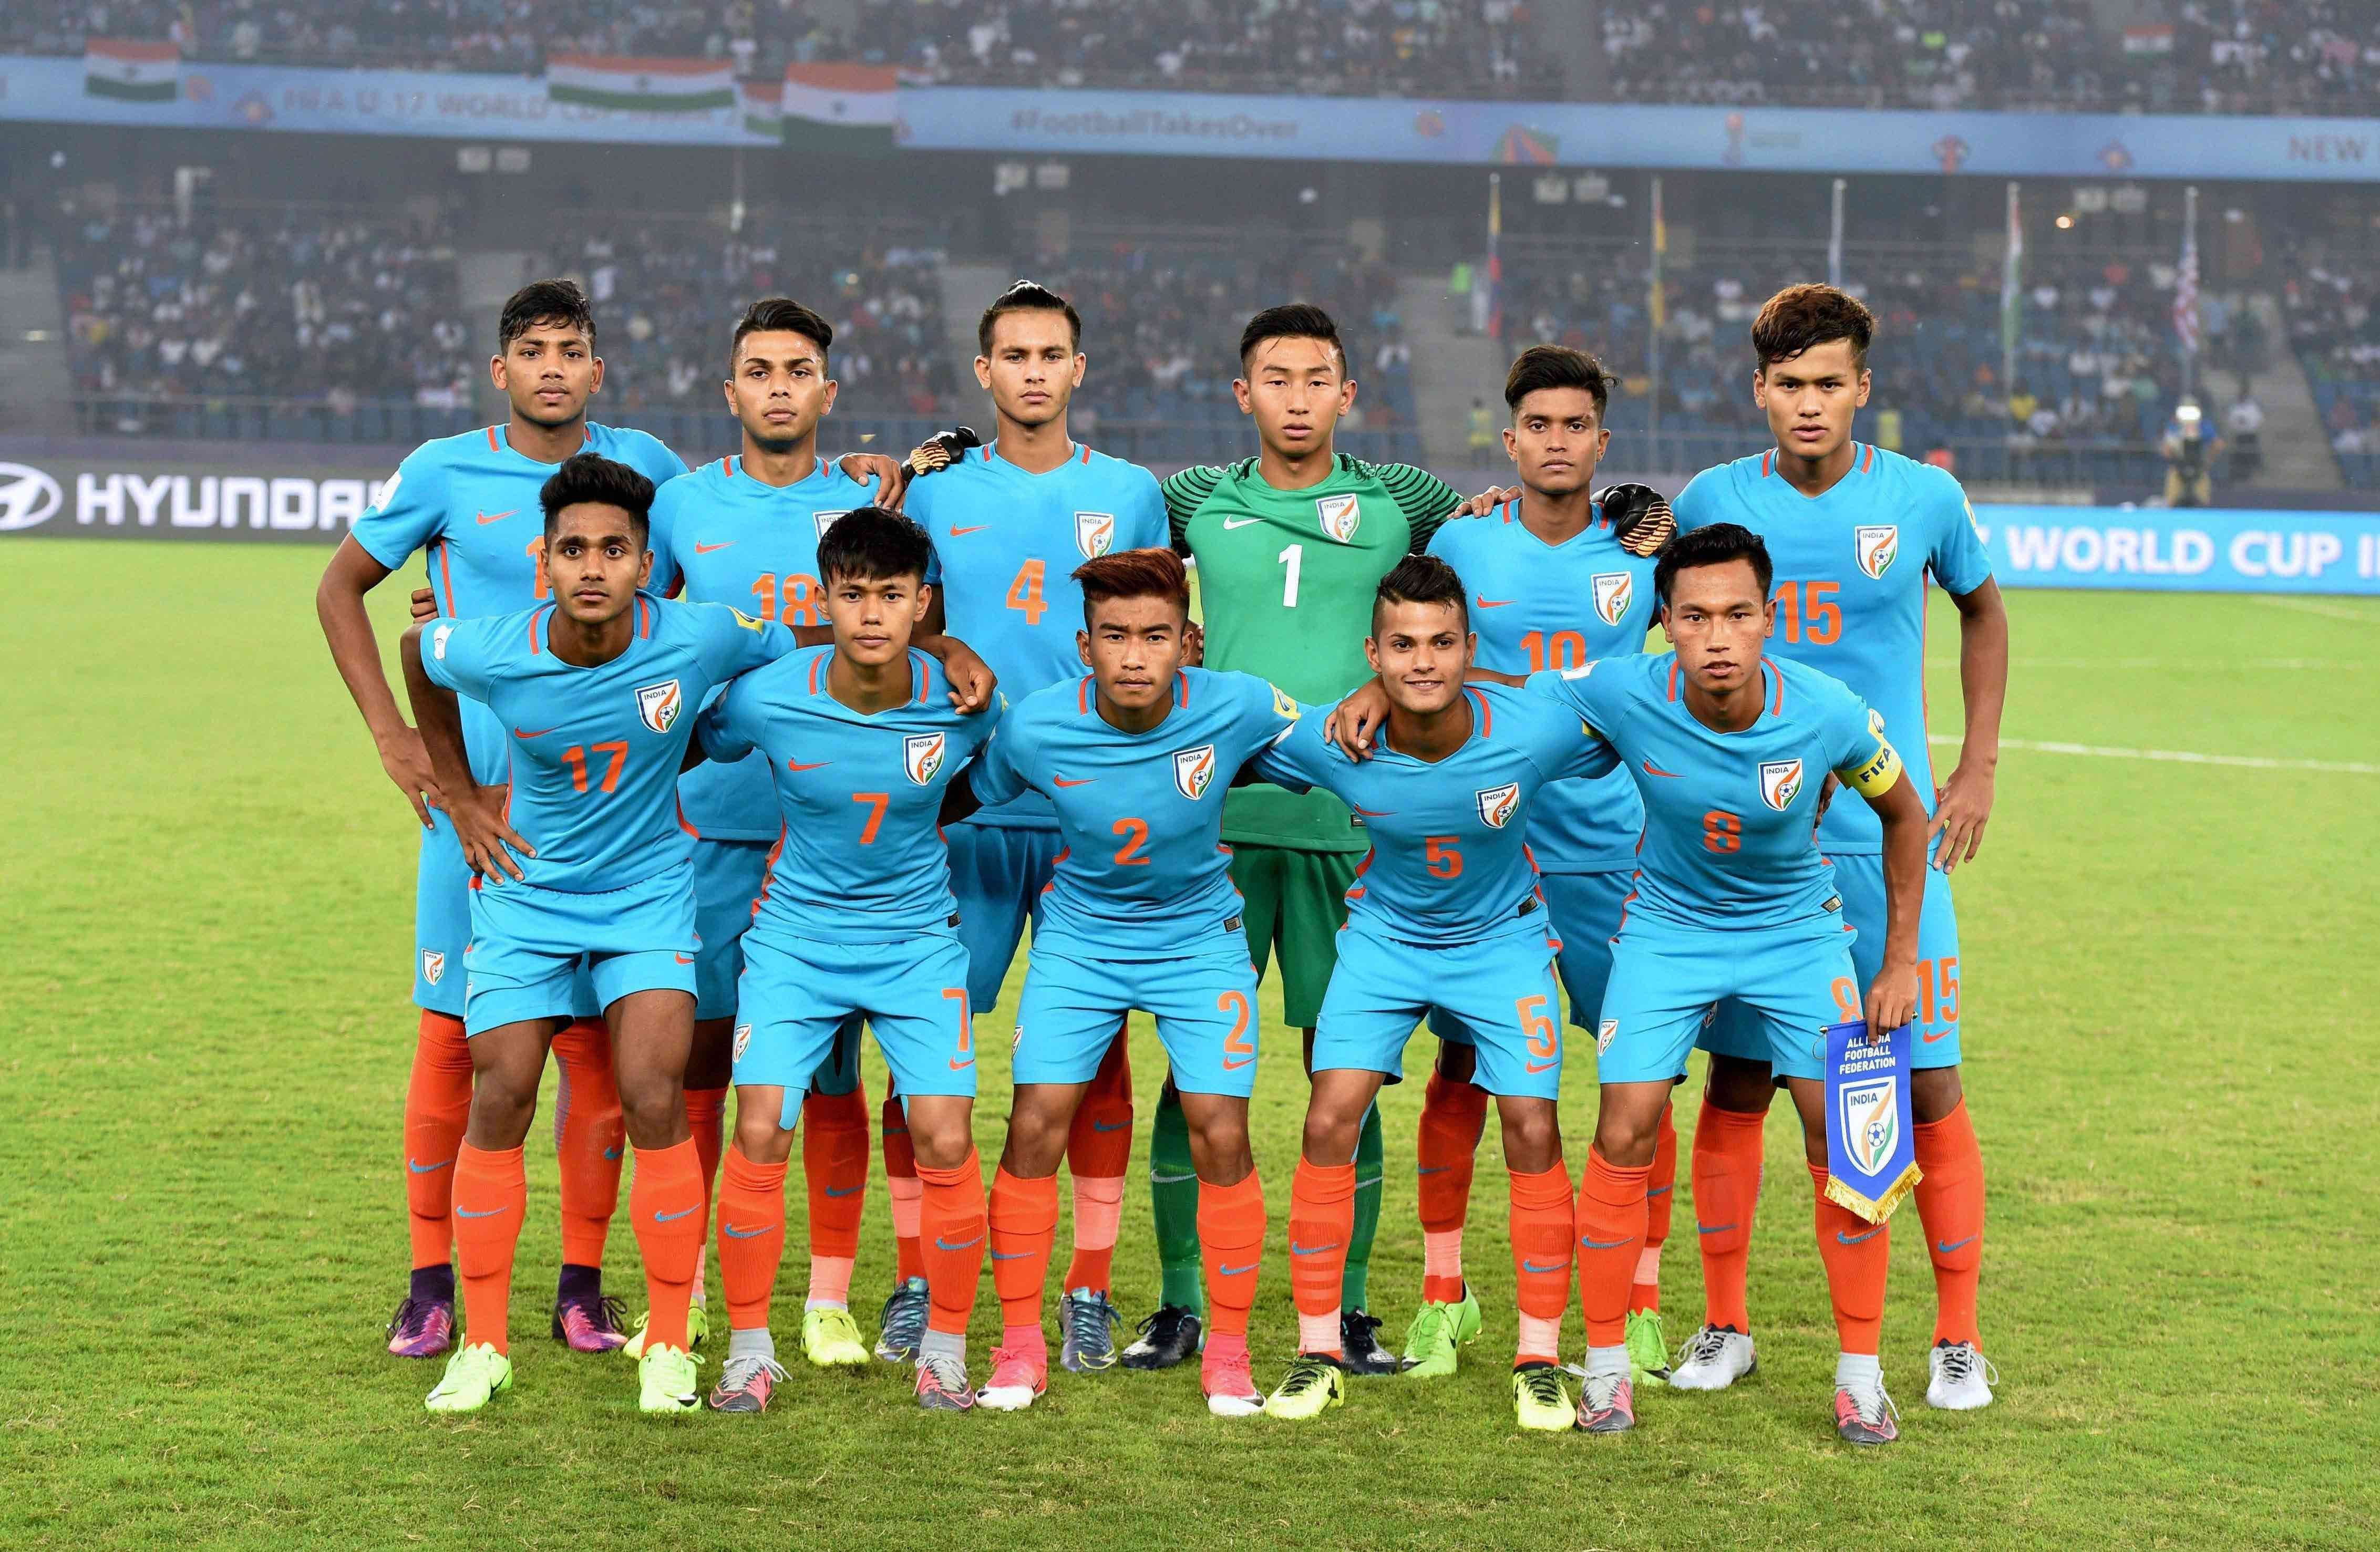 India U17 Football team take on the Maldives in their first match of